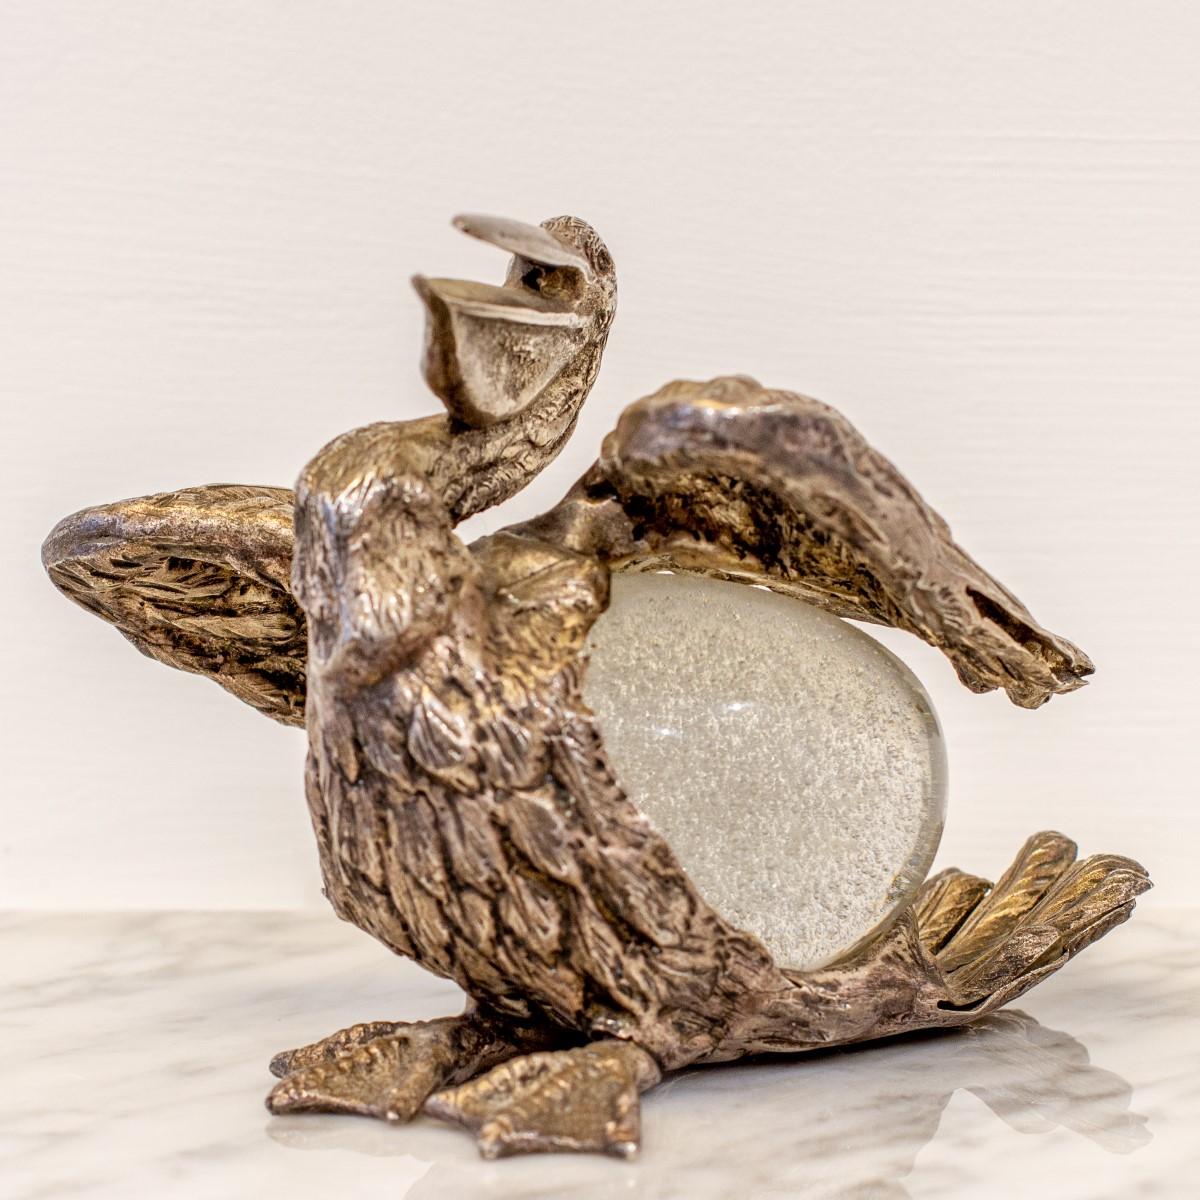 An Italian gilt silver bronze pelican by Gabriella Crespi with a hand-blown glass egg body and signed to the underside, circa 1970-1974. 

Gabriella Crespi (1922-2017) was an Italian artist who transformed objects by changing their function so